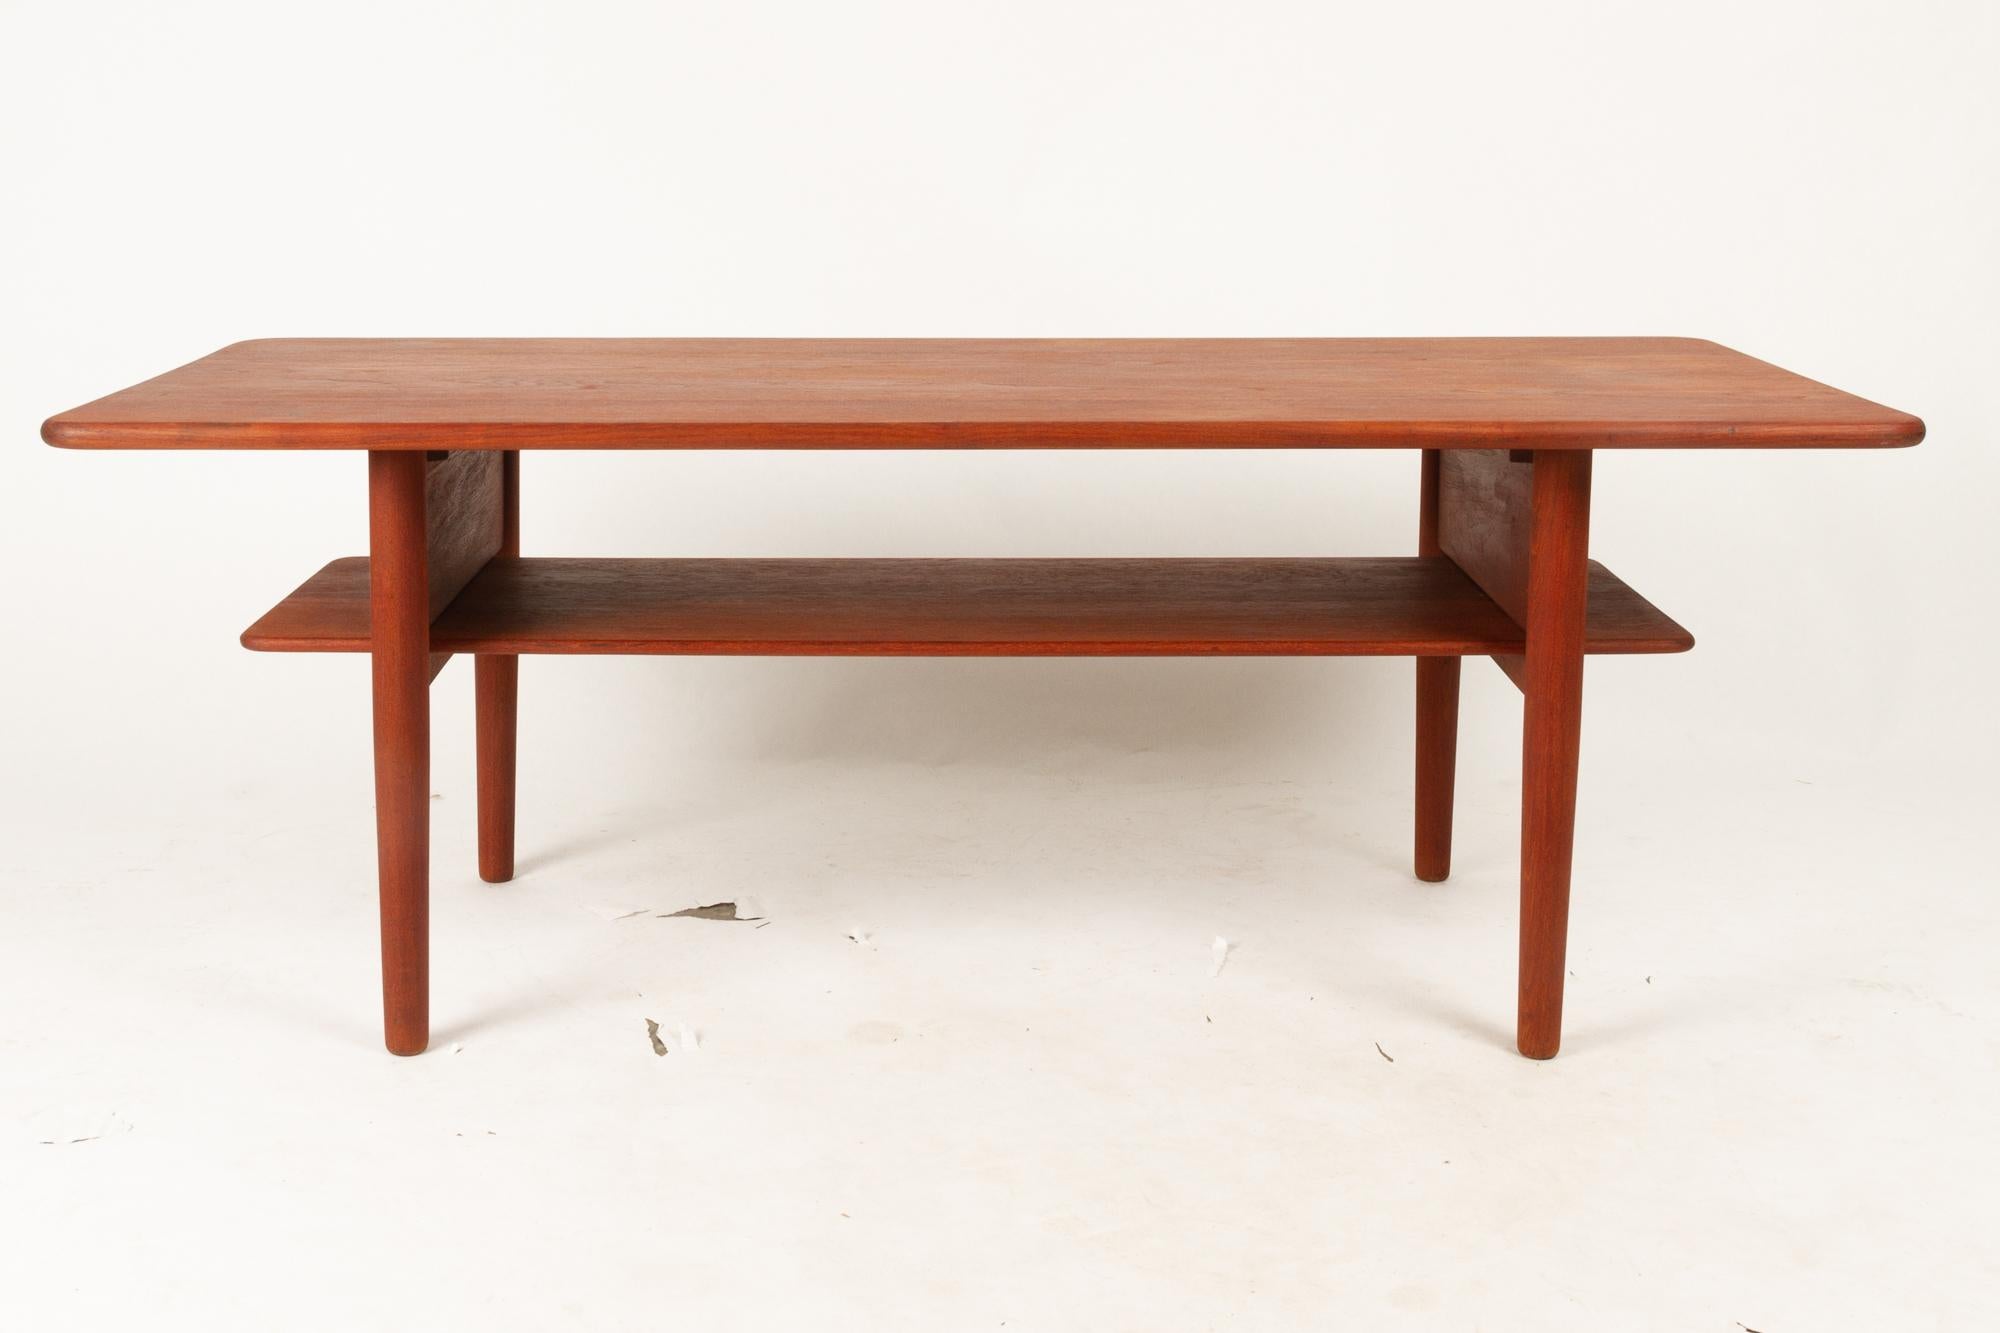 Danish coffee table in solid teak with underlying shelf.
Rare model by Danish architect Ib Kofod-Larsen in solid teak. Designed in 1952, made by Christensen & Larsen.
Good original vintage condition. Beautiful patina. Gently cleaned and oiled.